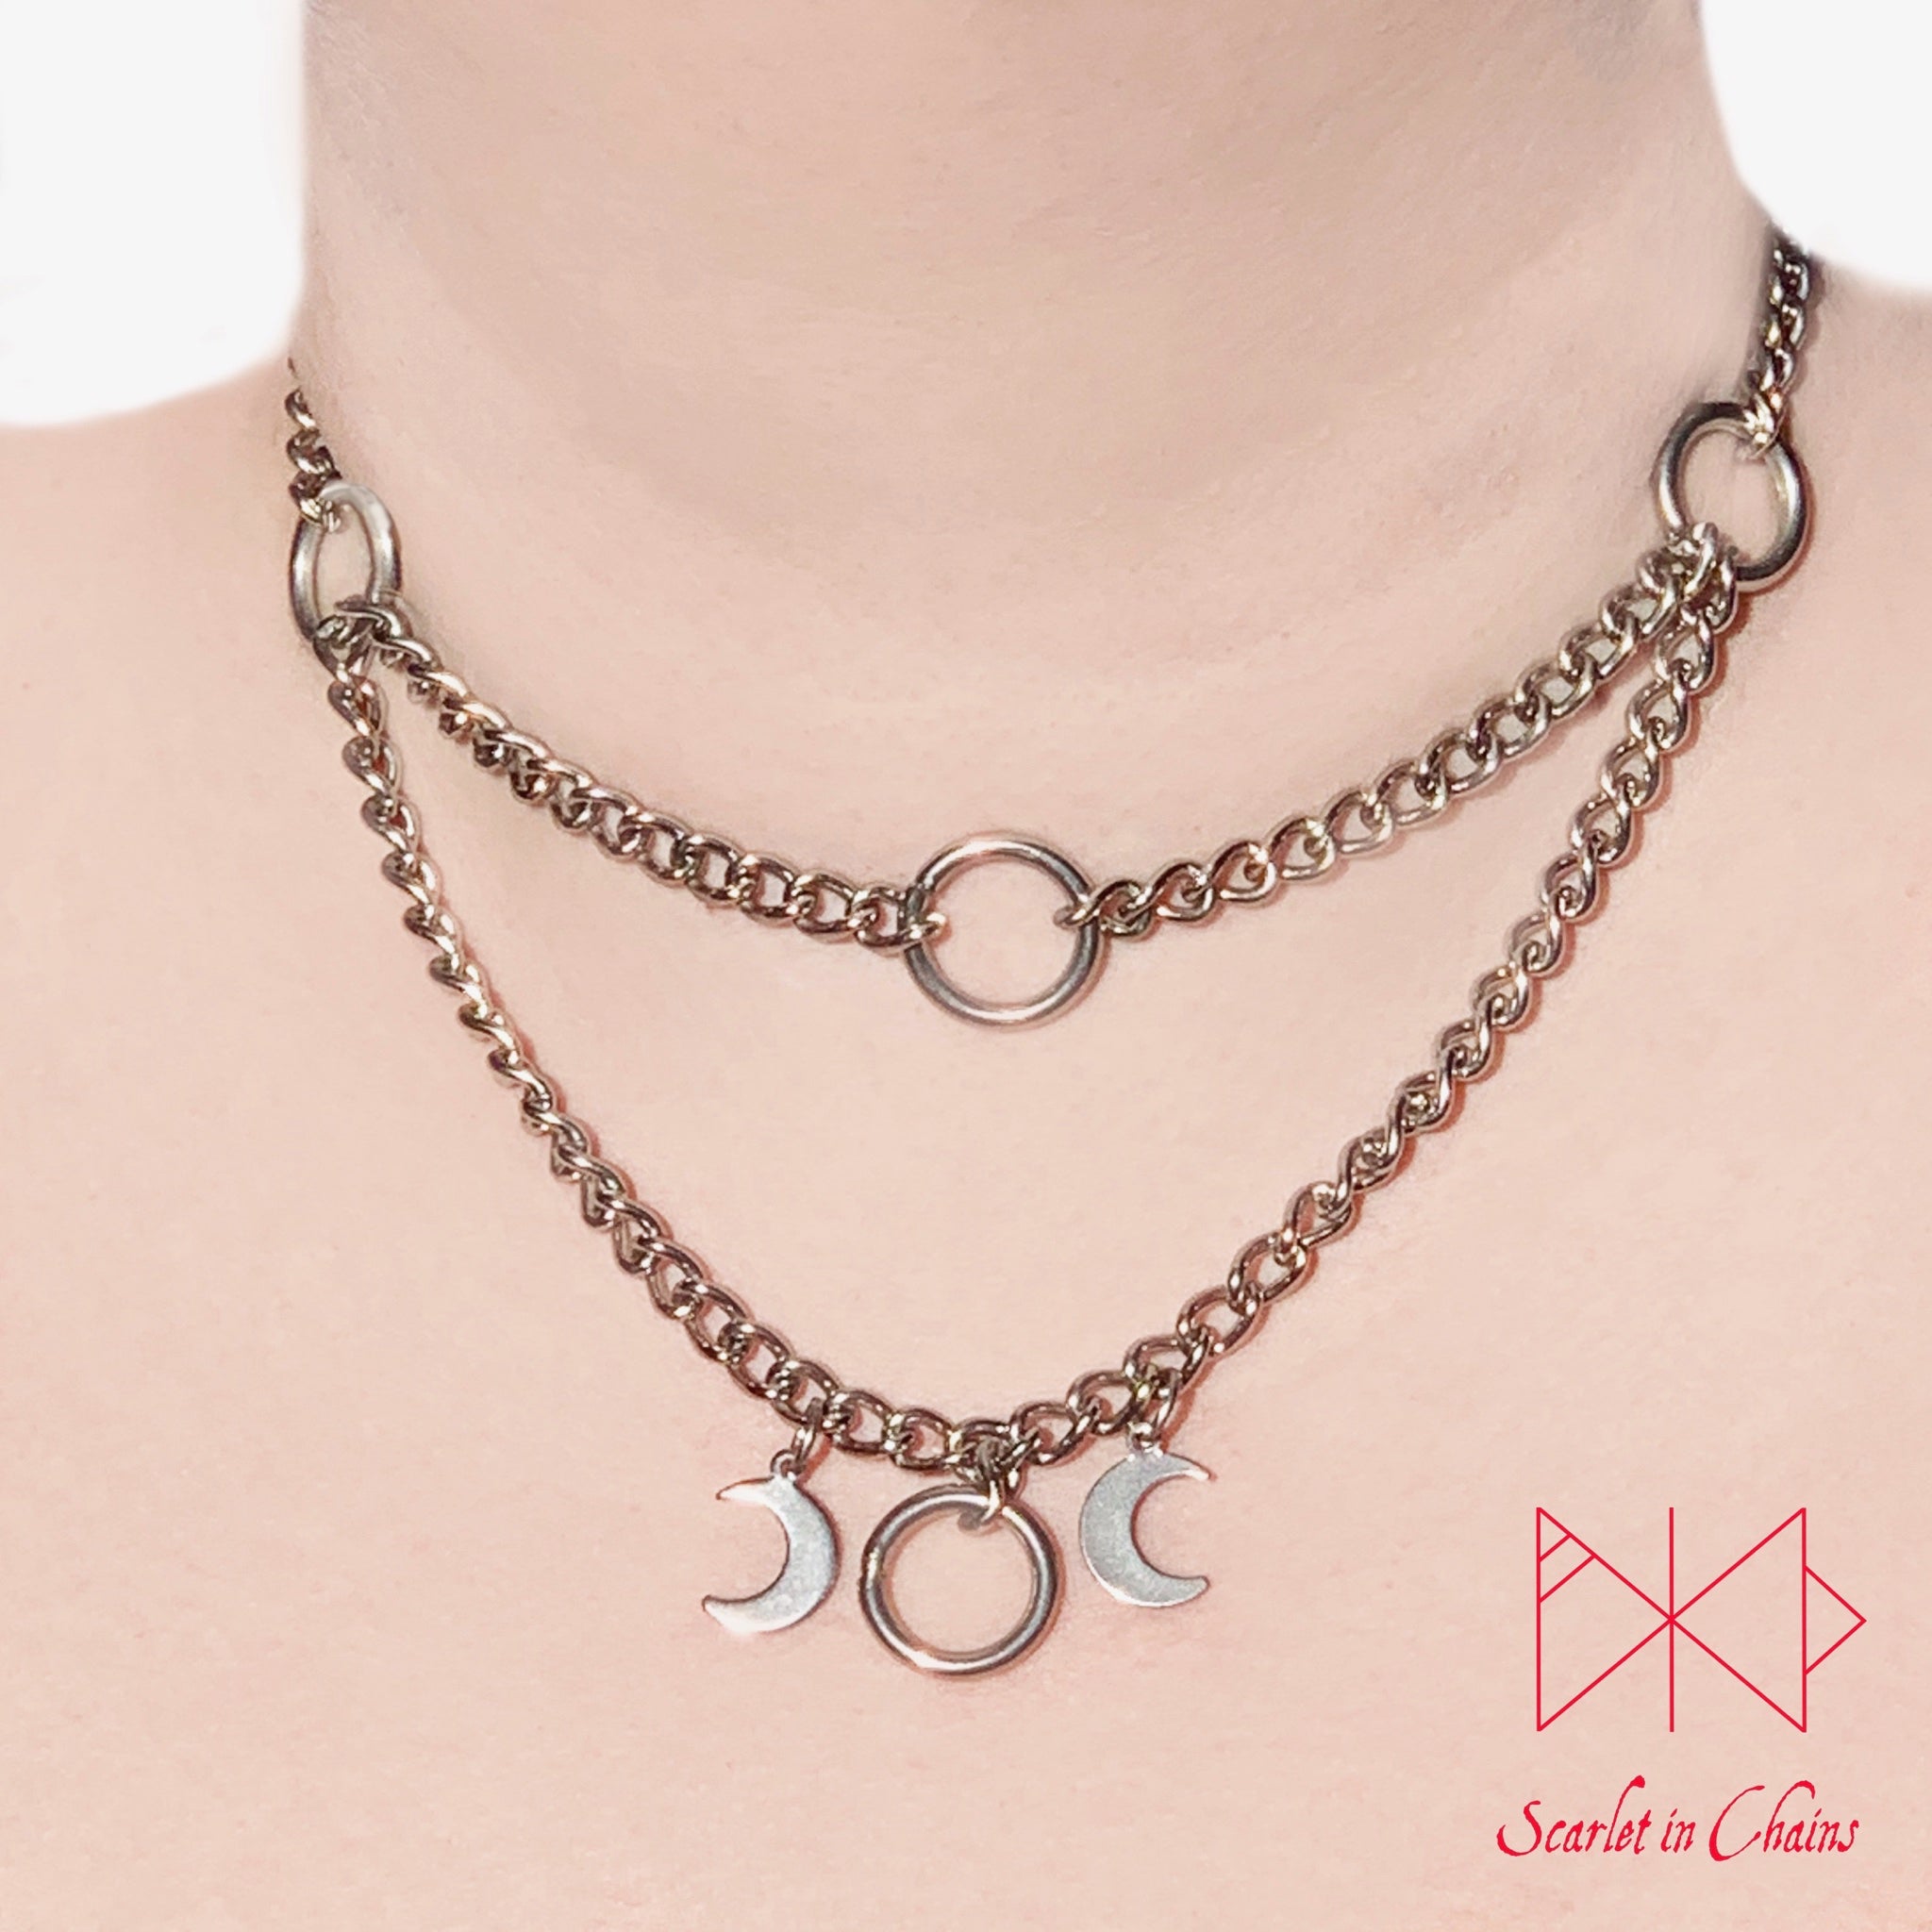 Layered stainless steel chain choker necklace with o ring choker section at the top and the goddess necklace at the base. worn